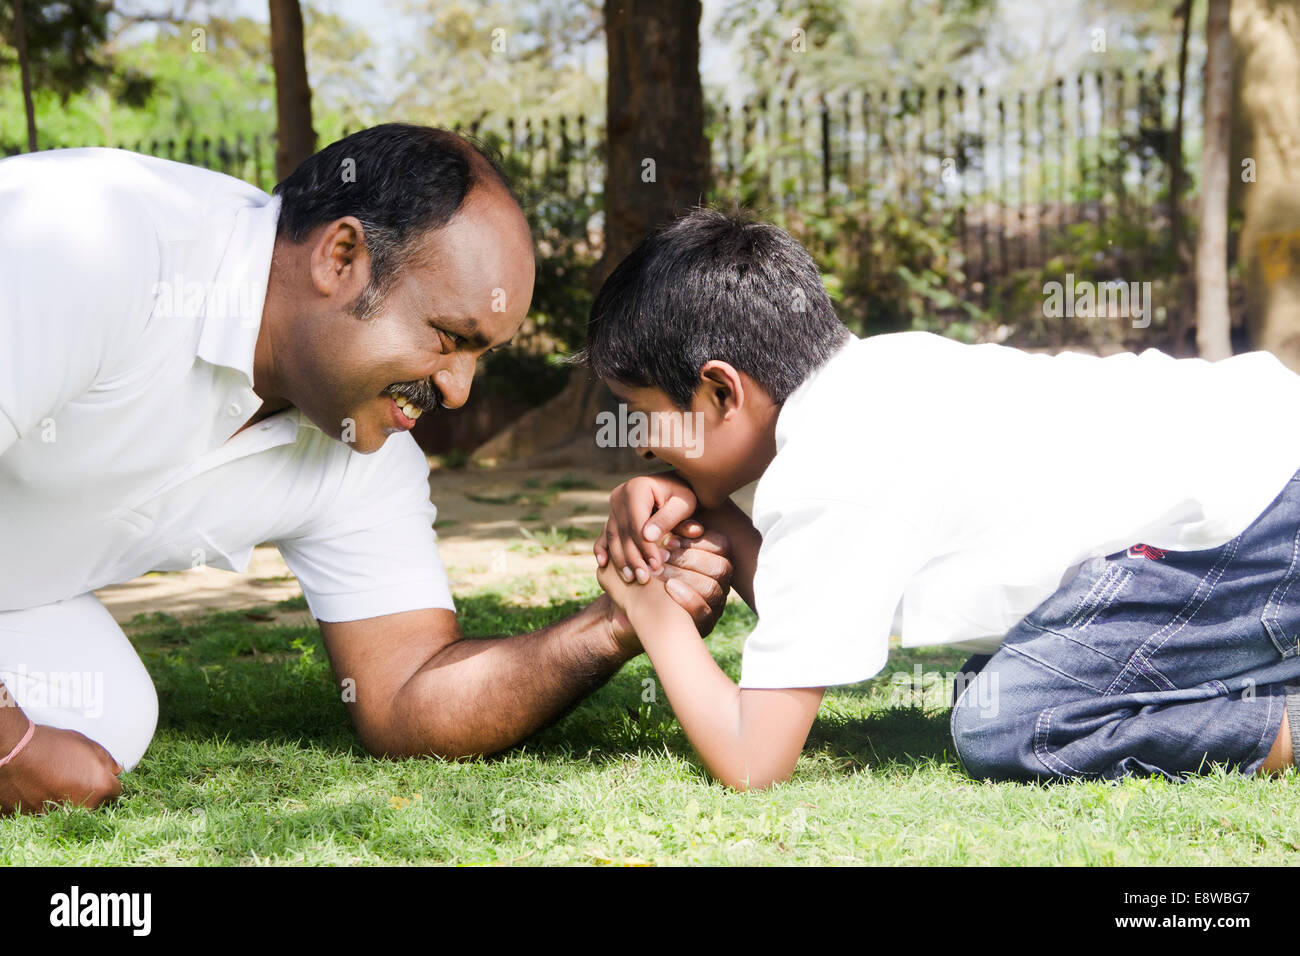 1 Indian man Playful With Kid Stock Photo